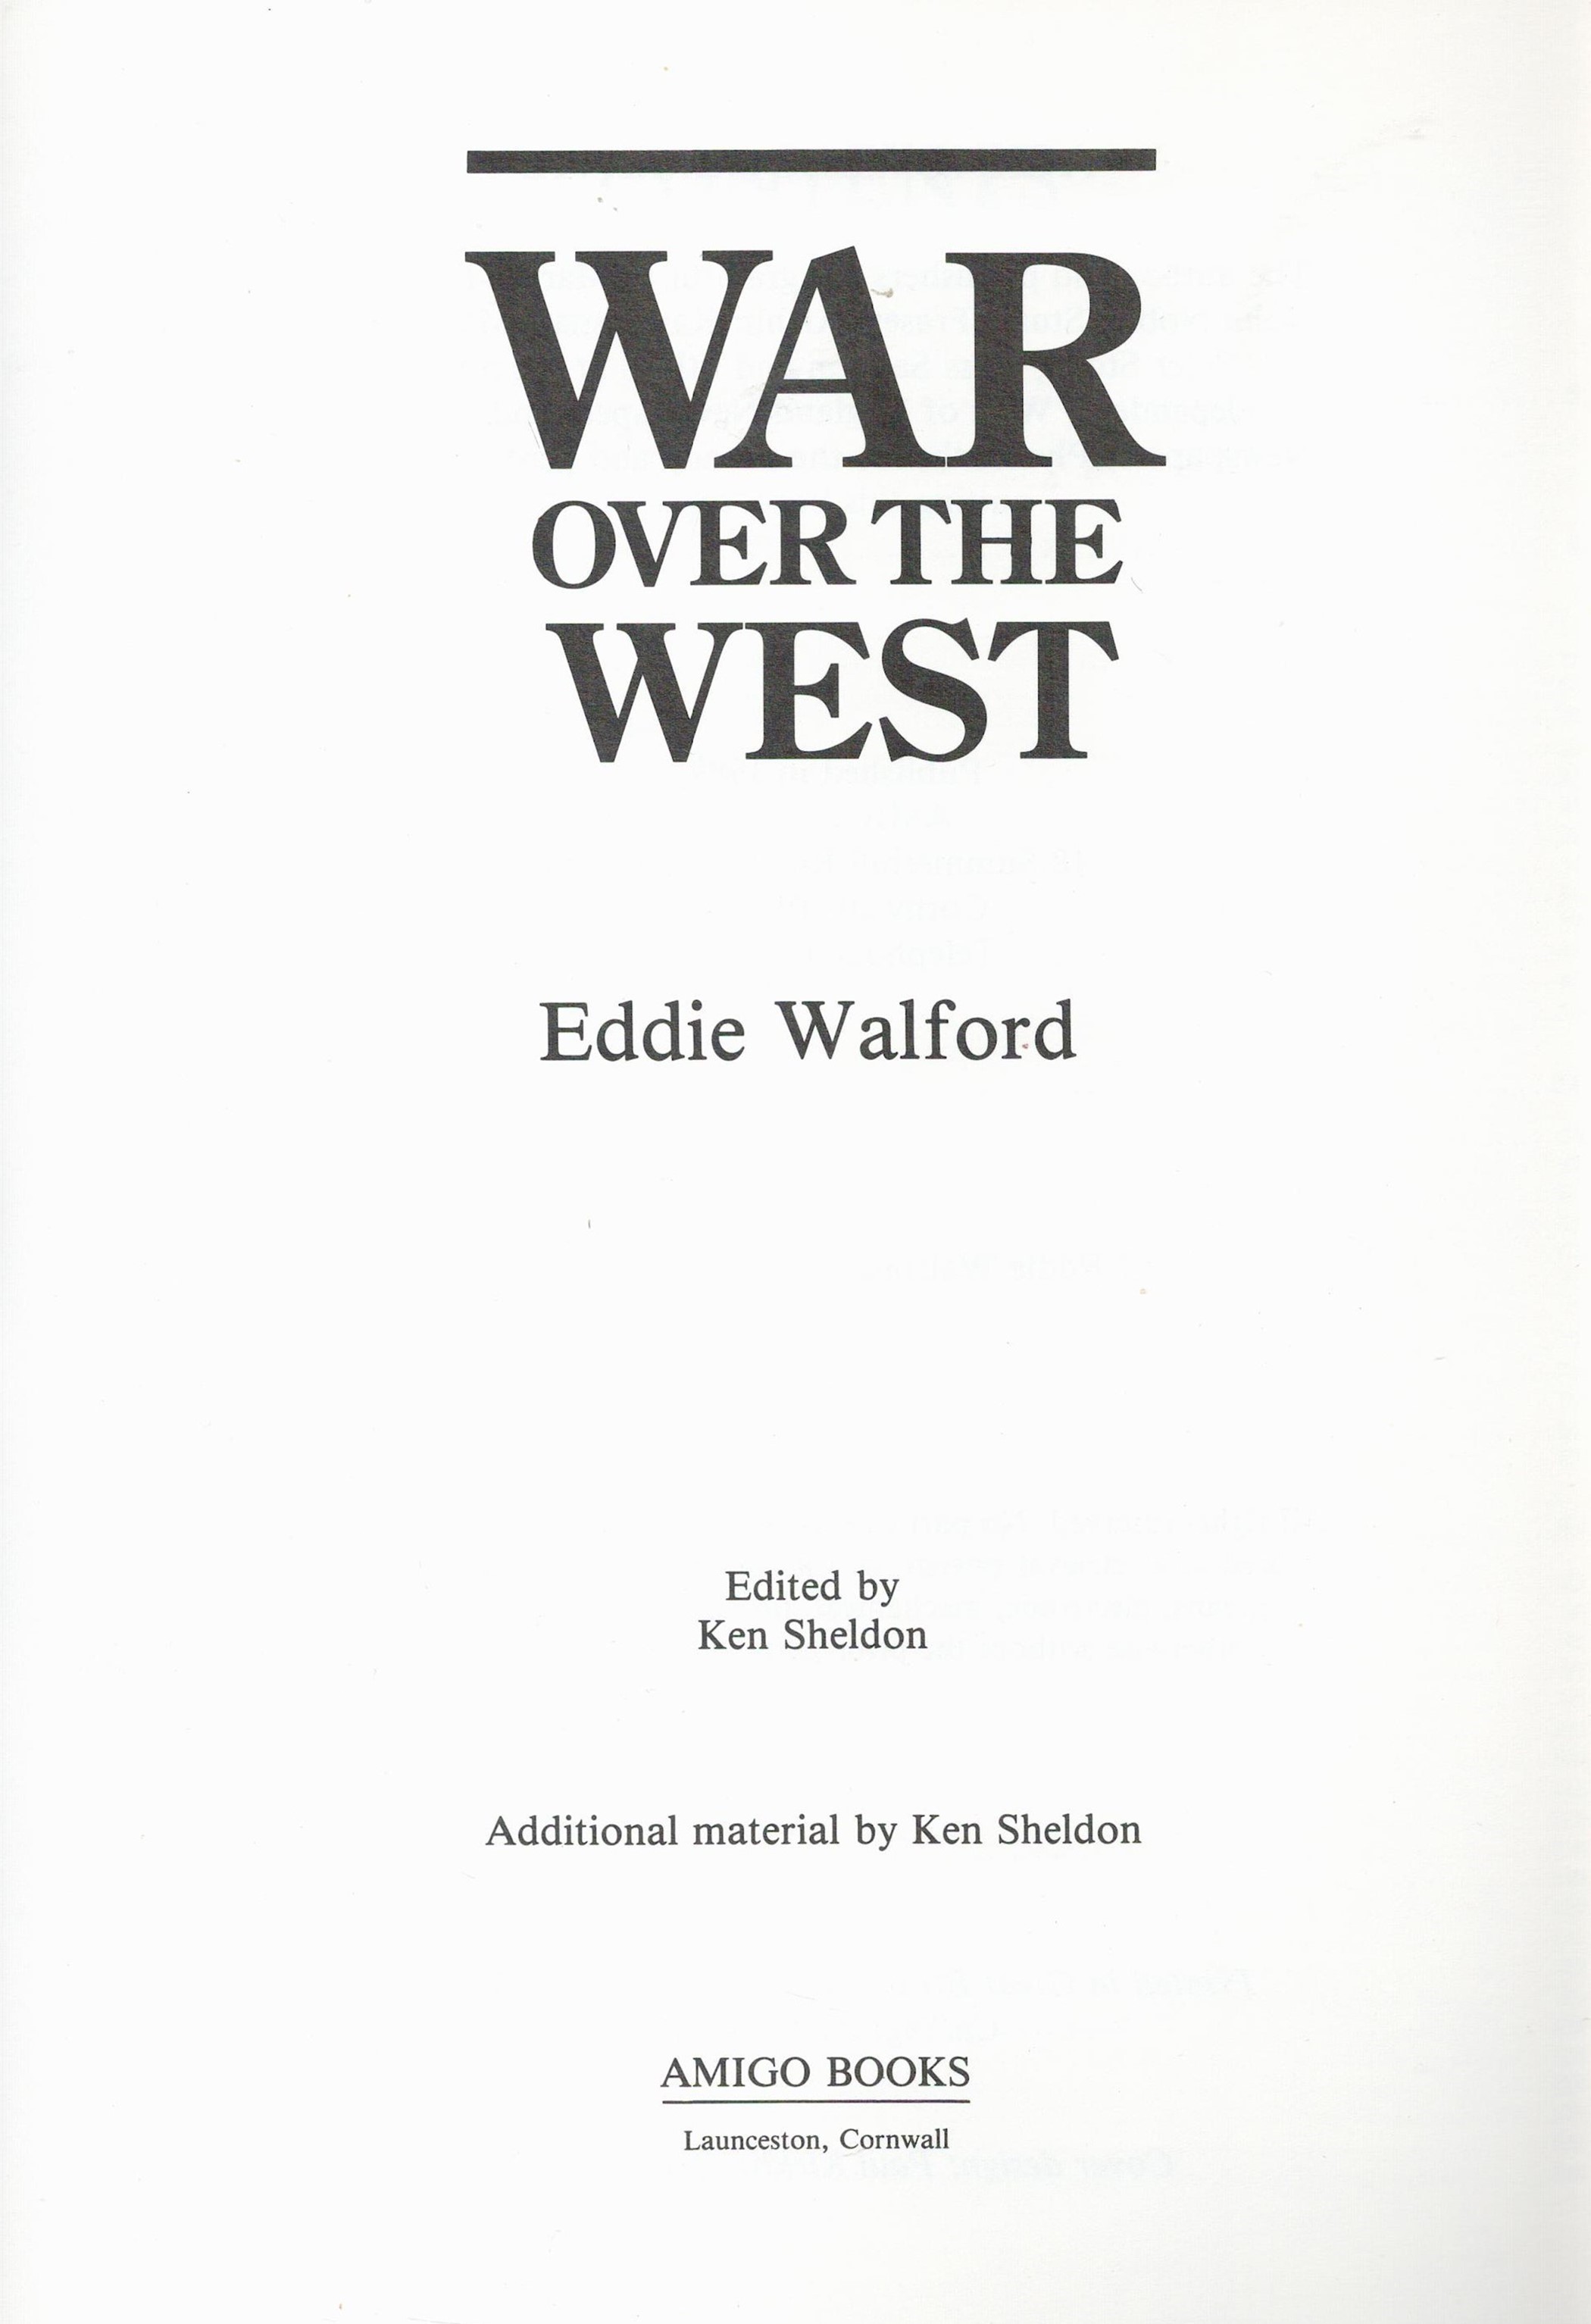 War over The West by Eddie Walford Softback Book 1989 First Edition published by Amigo Books some - Image 6 of 9